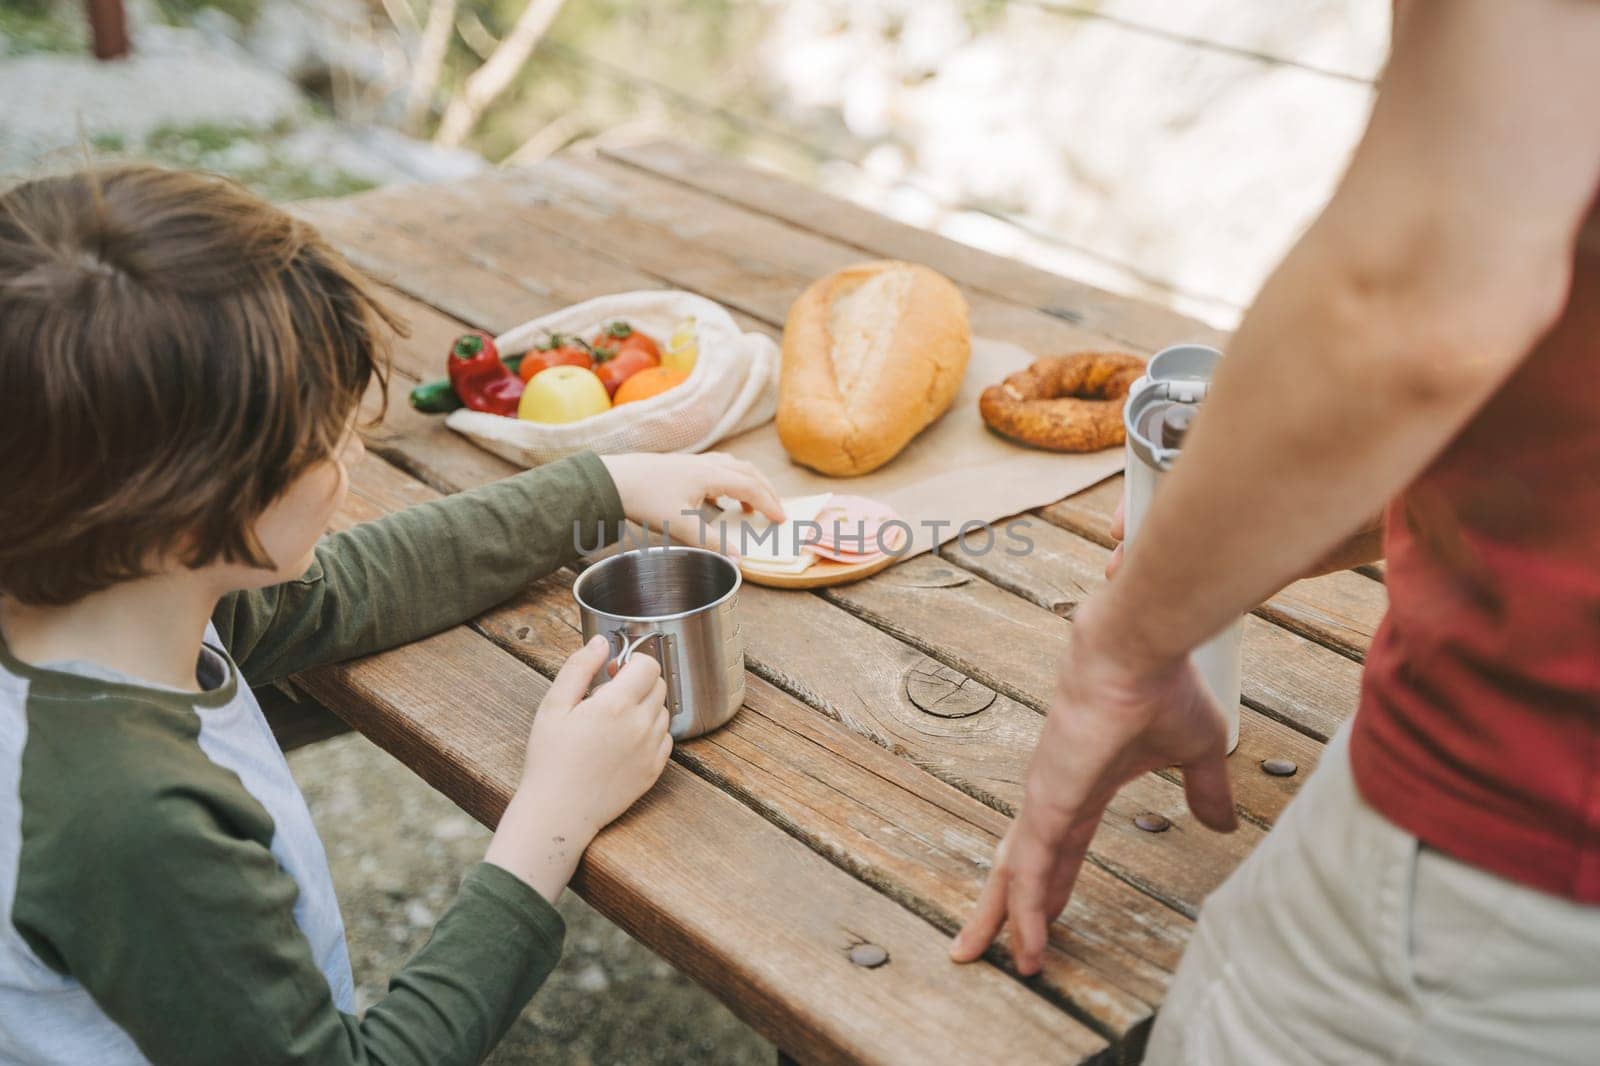 Close-up view of father and his school boy son on a family picnic in the mountains. Child kid and his dad taking a rest and enjoying a picnic while hiking in the mountains.